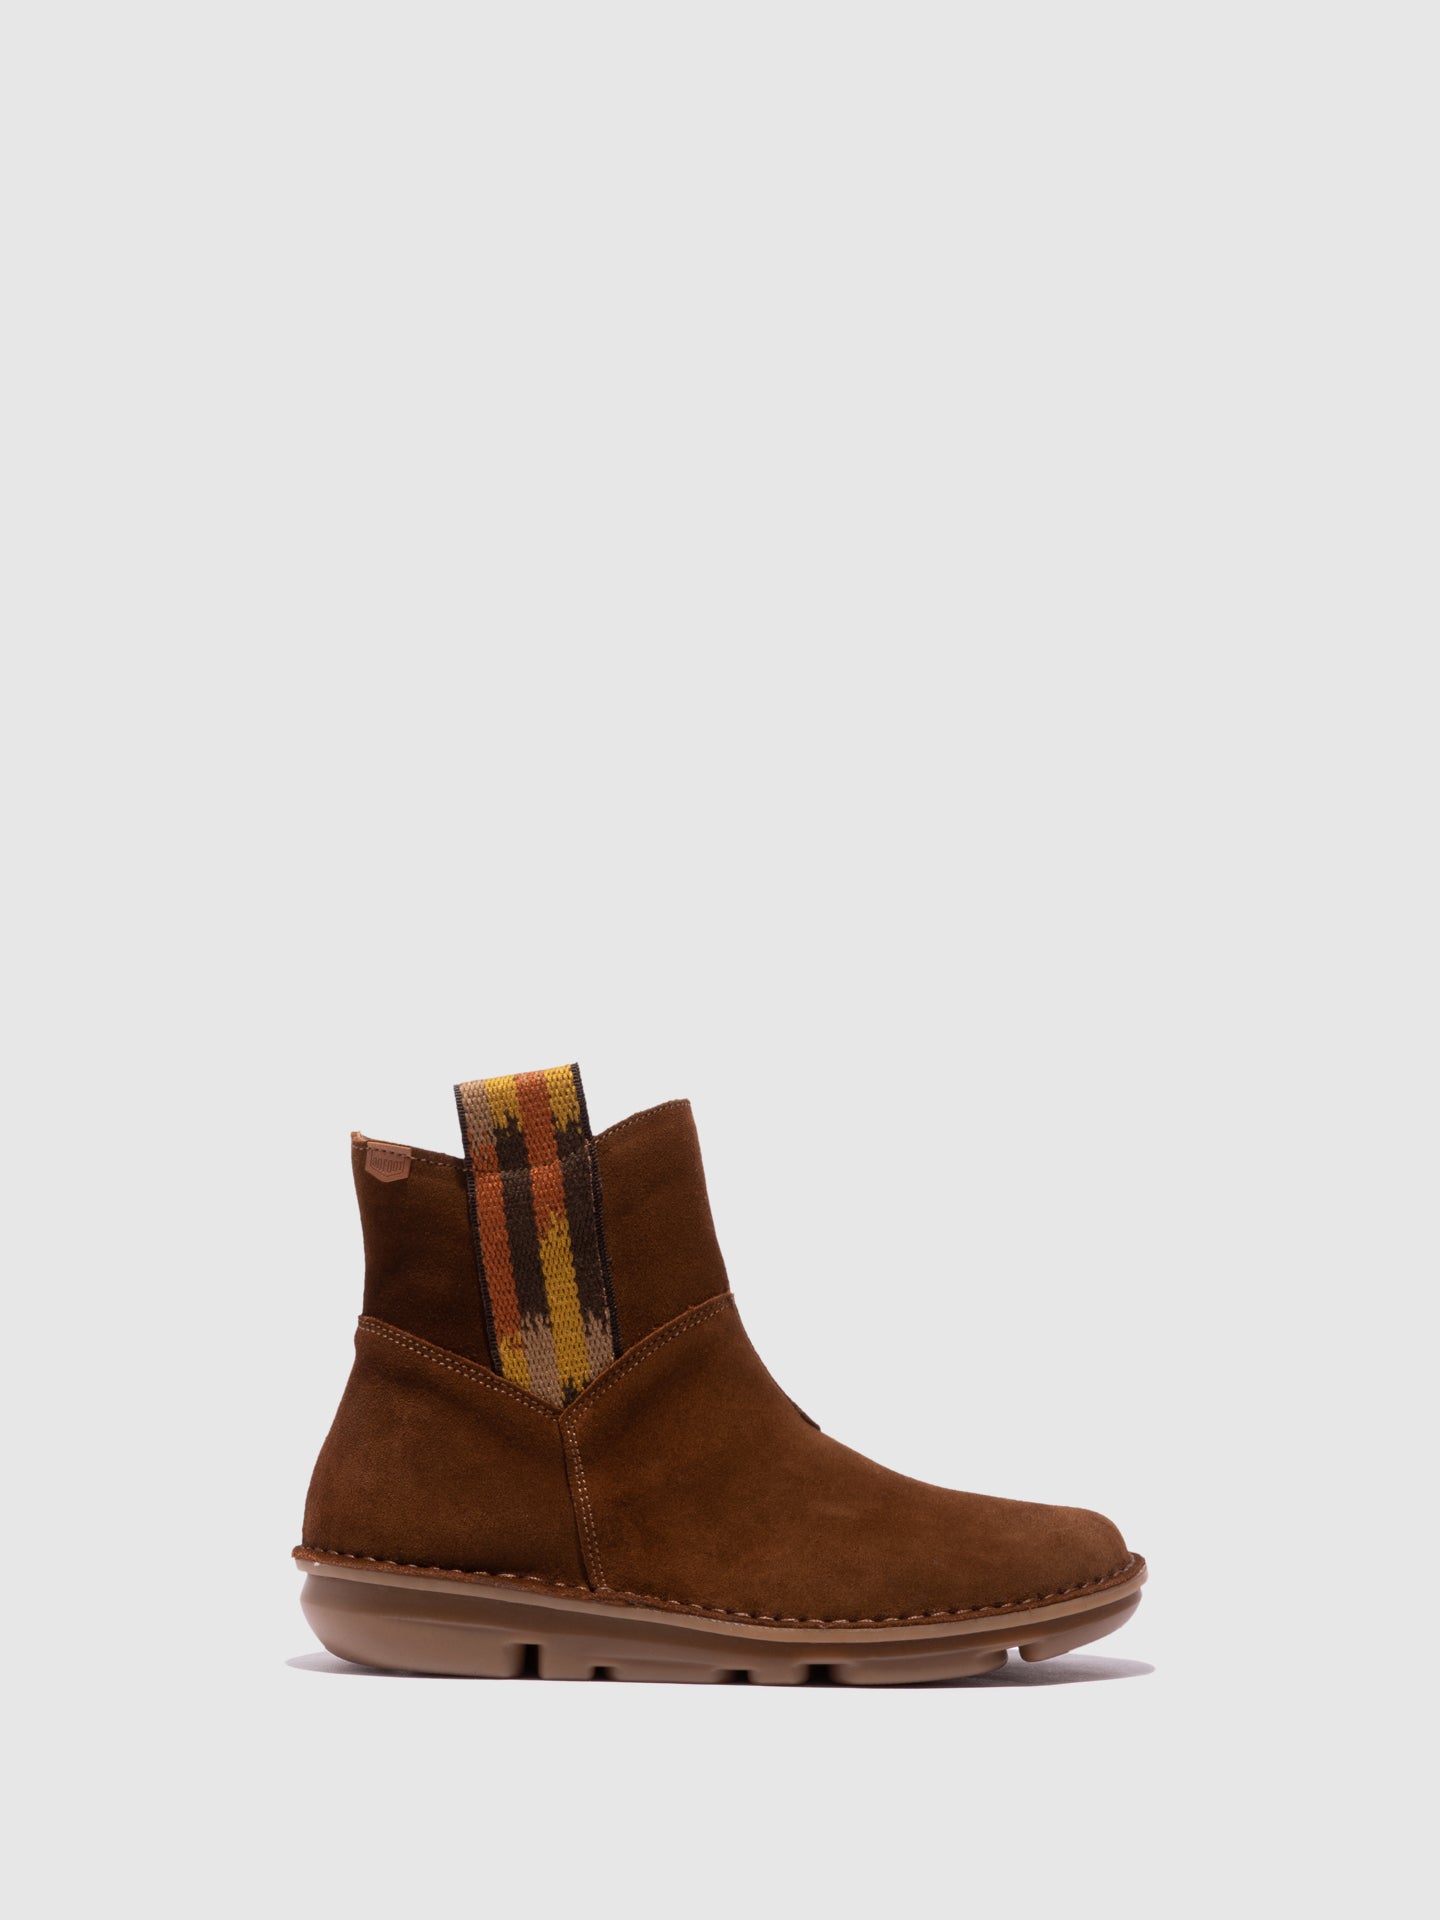 On Foot Brown Chelsea Ankle Boots